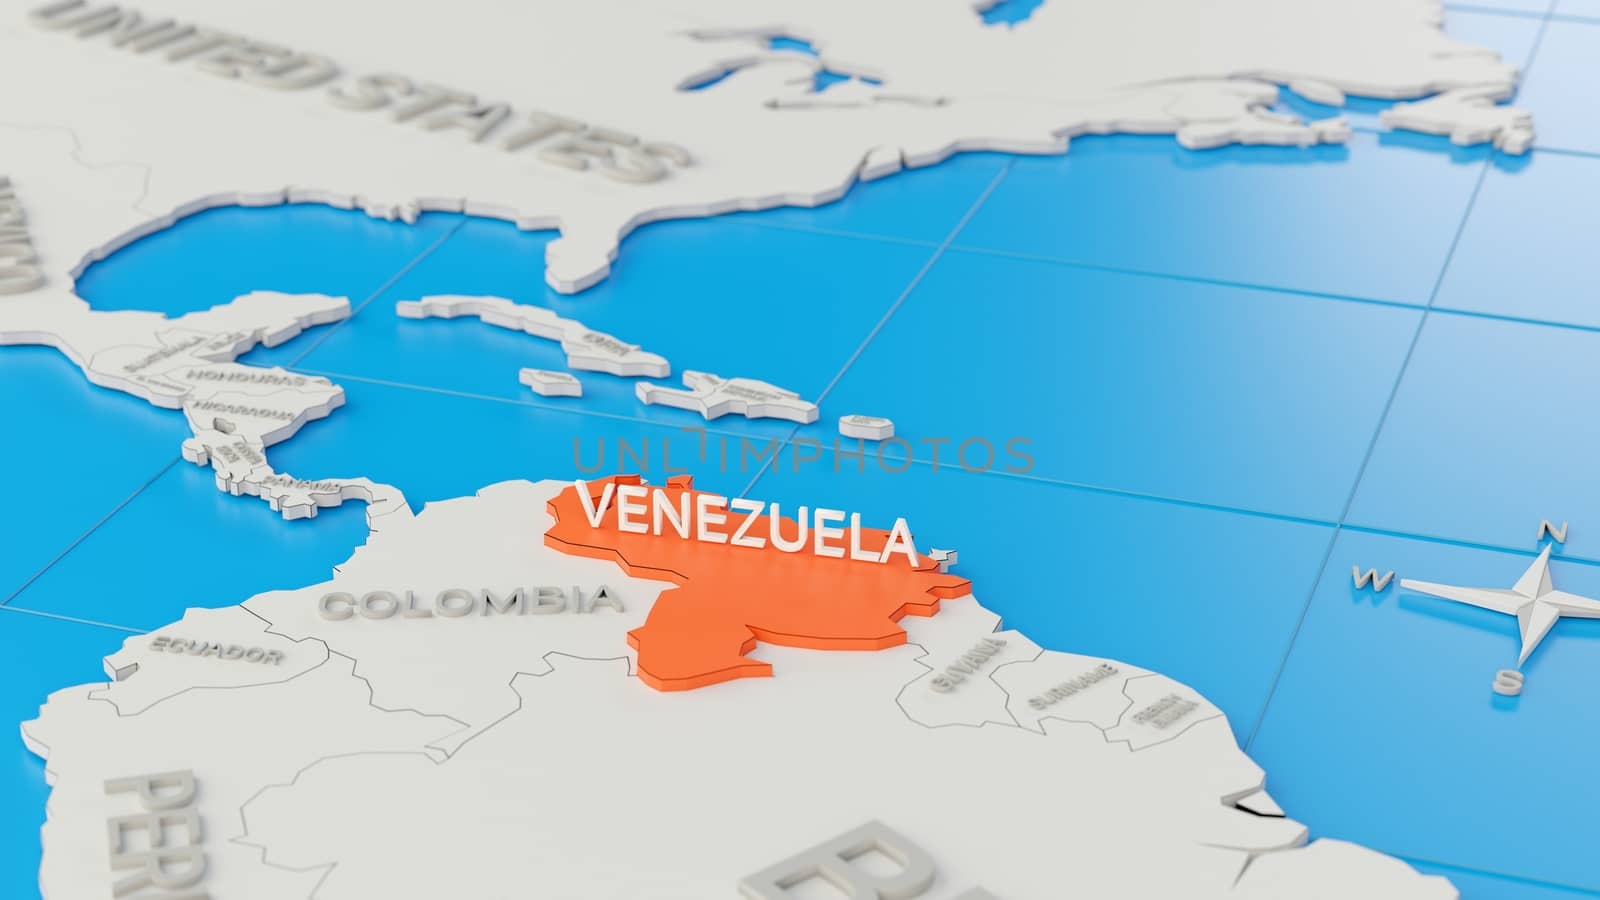 Simplified 3D map of South America, with Venezuela highlighted. by hernan_hyper